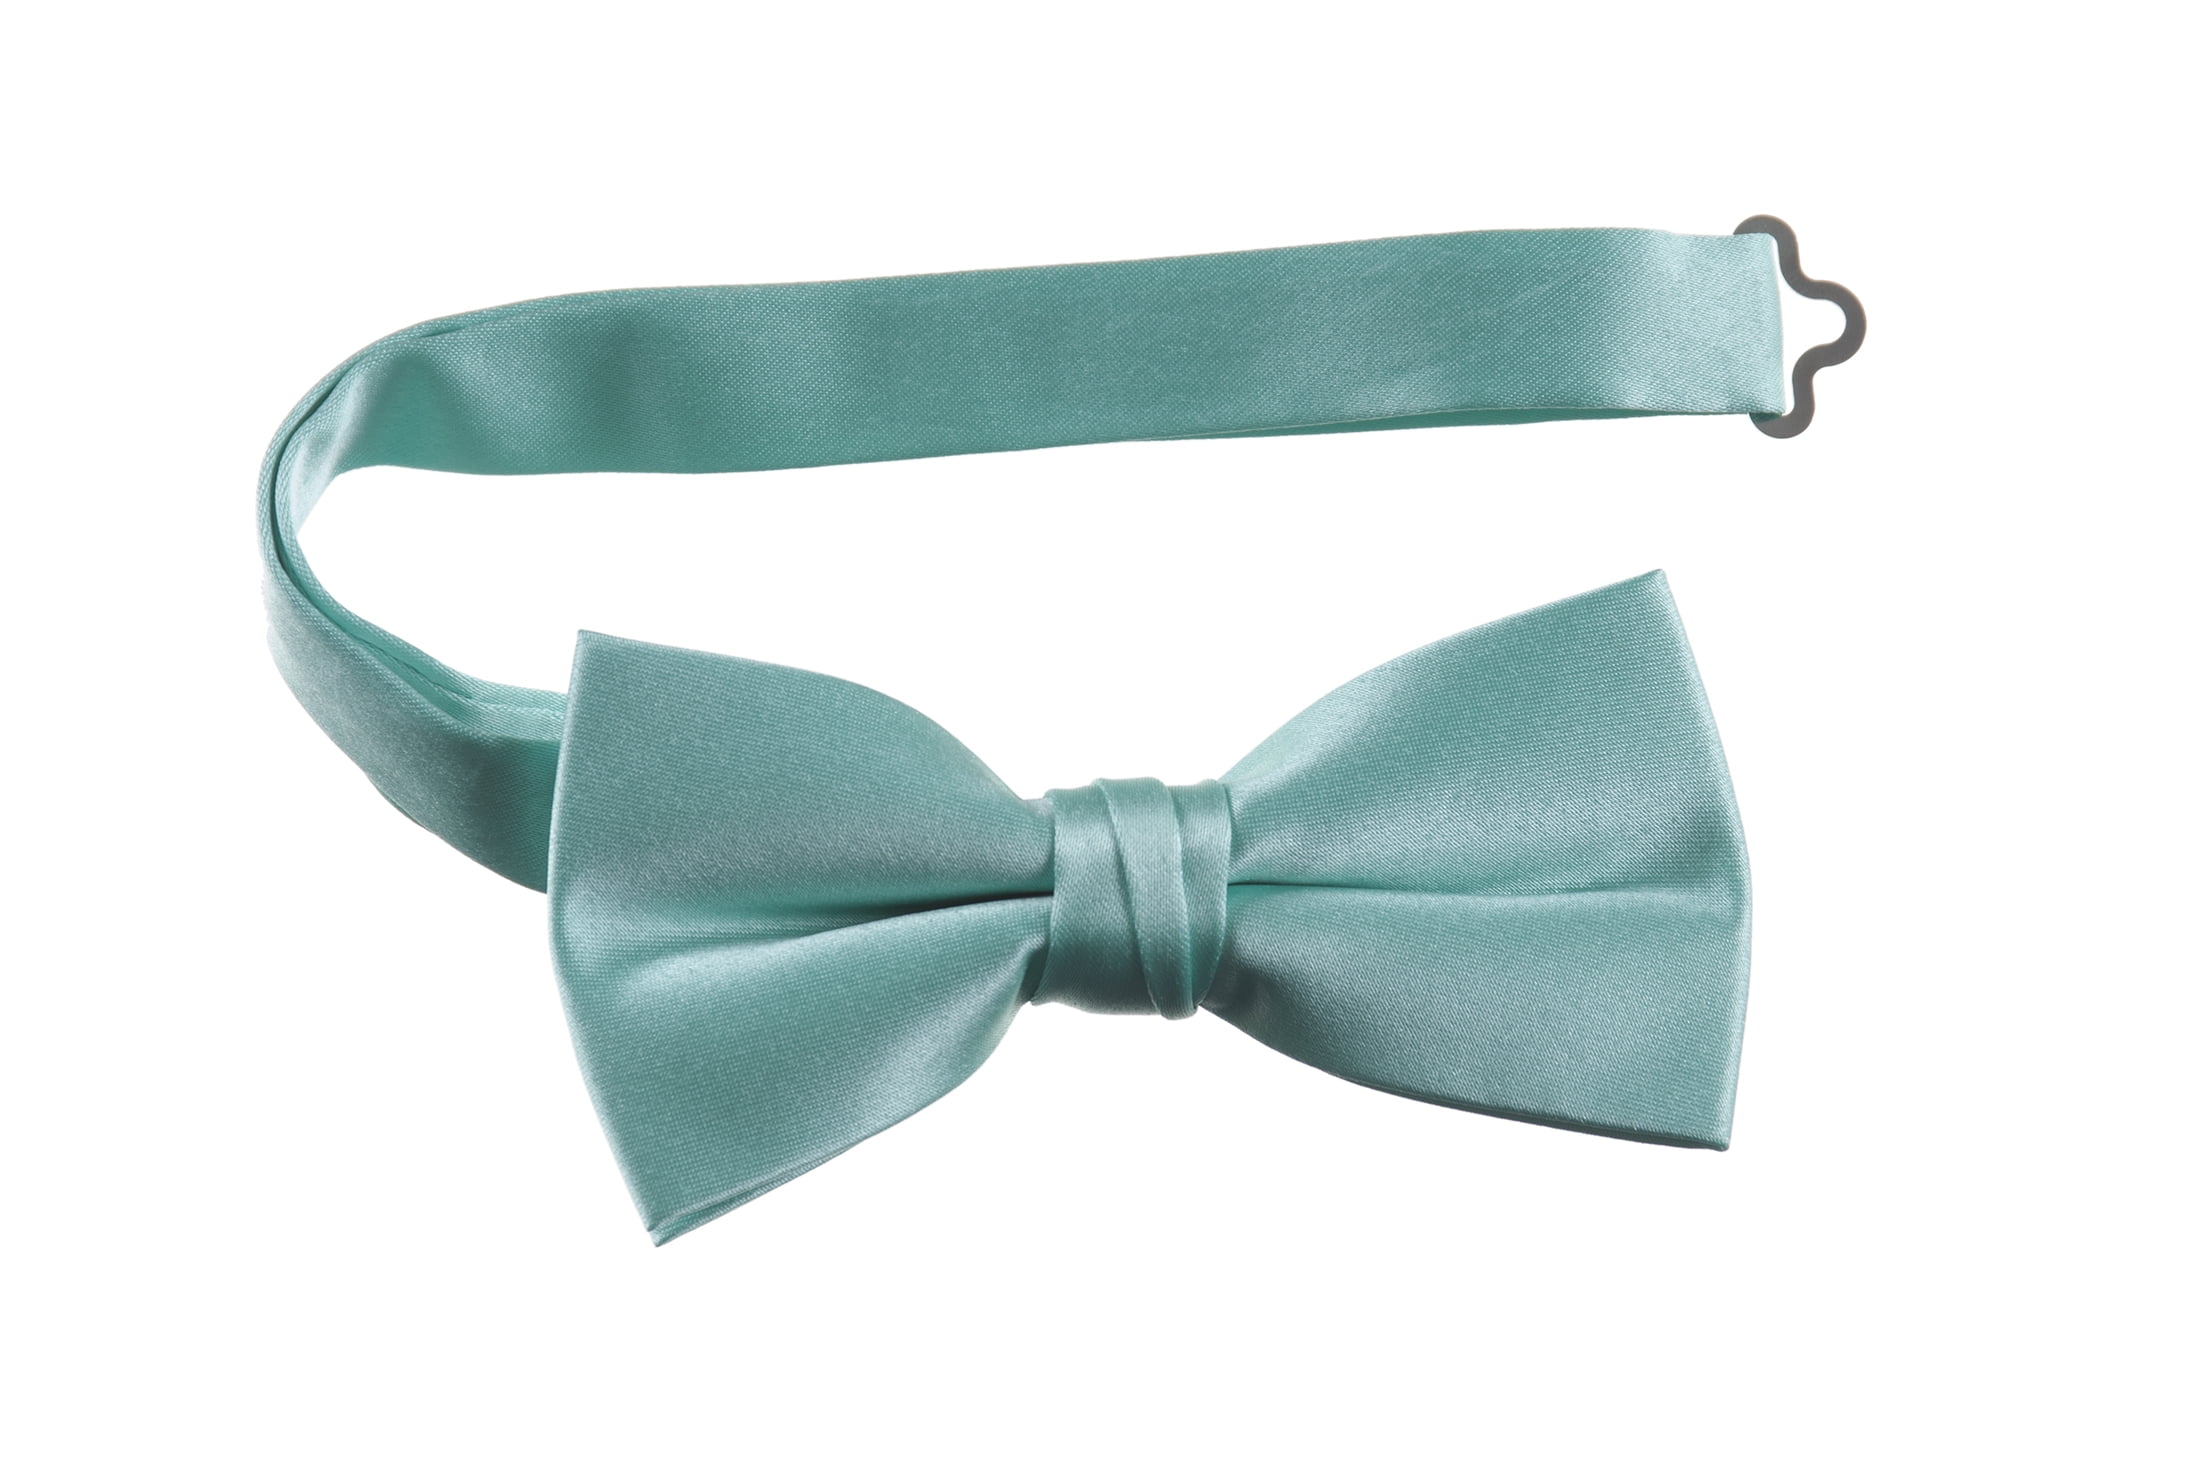 Adjustable Bow Tie & Suspenders Details about   New Teal Mint Green Bow Tie & Suspender Set